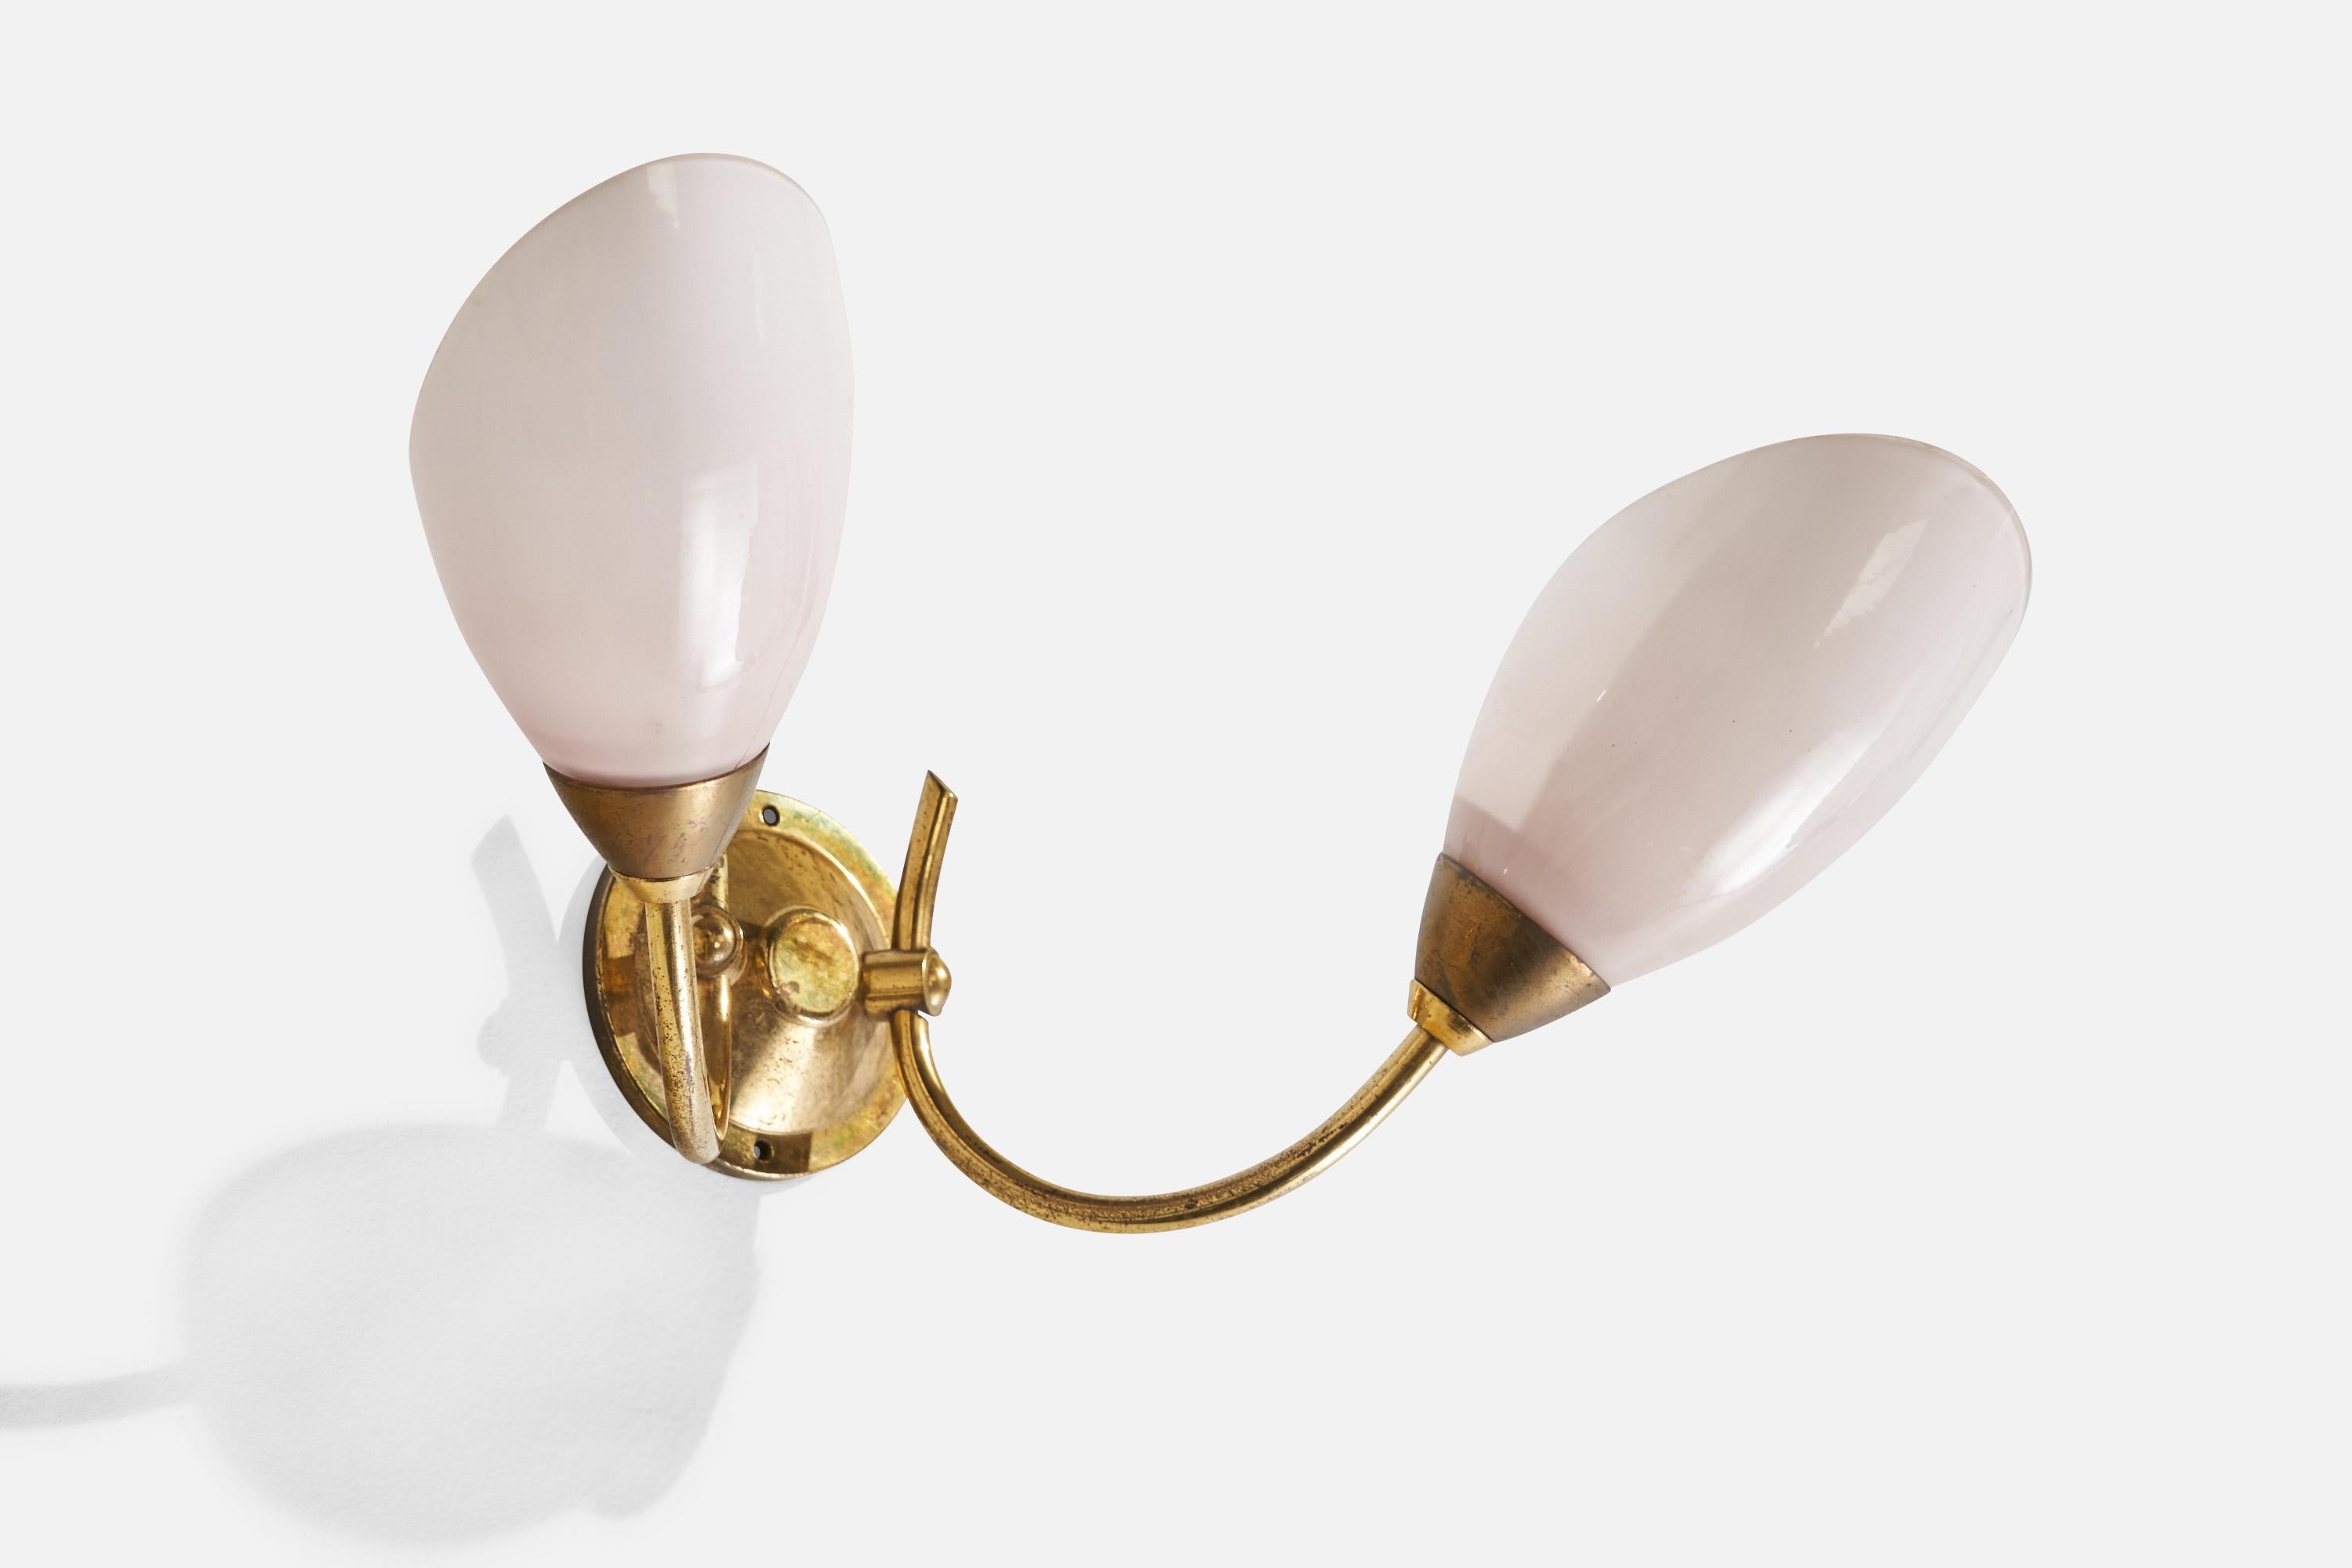 A two-armed brass and opaline glass wall light designed and produced in France, 1950s.

Overall Dimensions (inches): 5.5”H x 13” W x 8”  D
Back Plate Dimensions (inches): 2.75 H x 2.75”  W x .50” D
Bulb Specifications: E-12 Bulb
Number of Sockets: